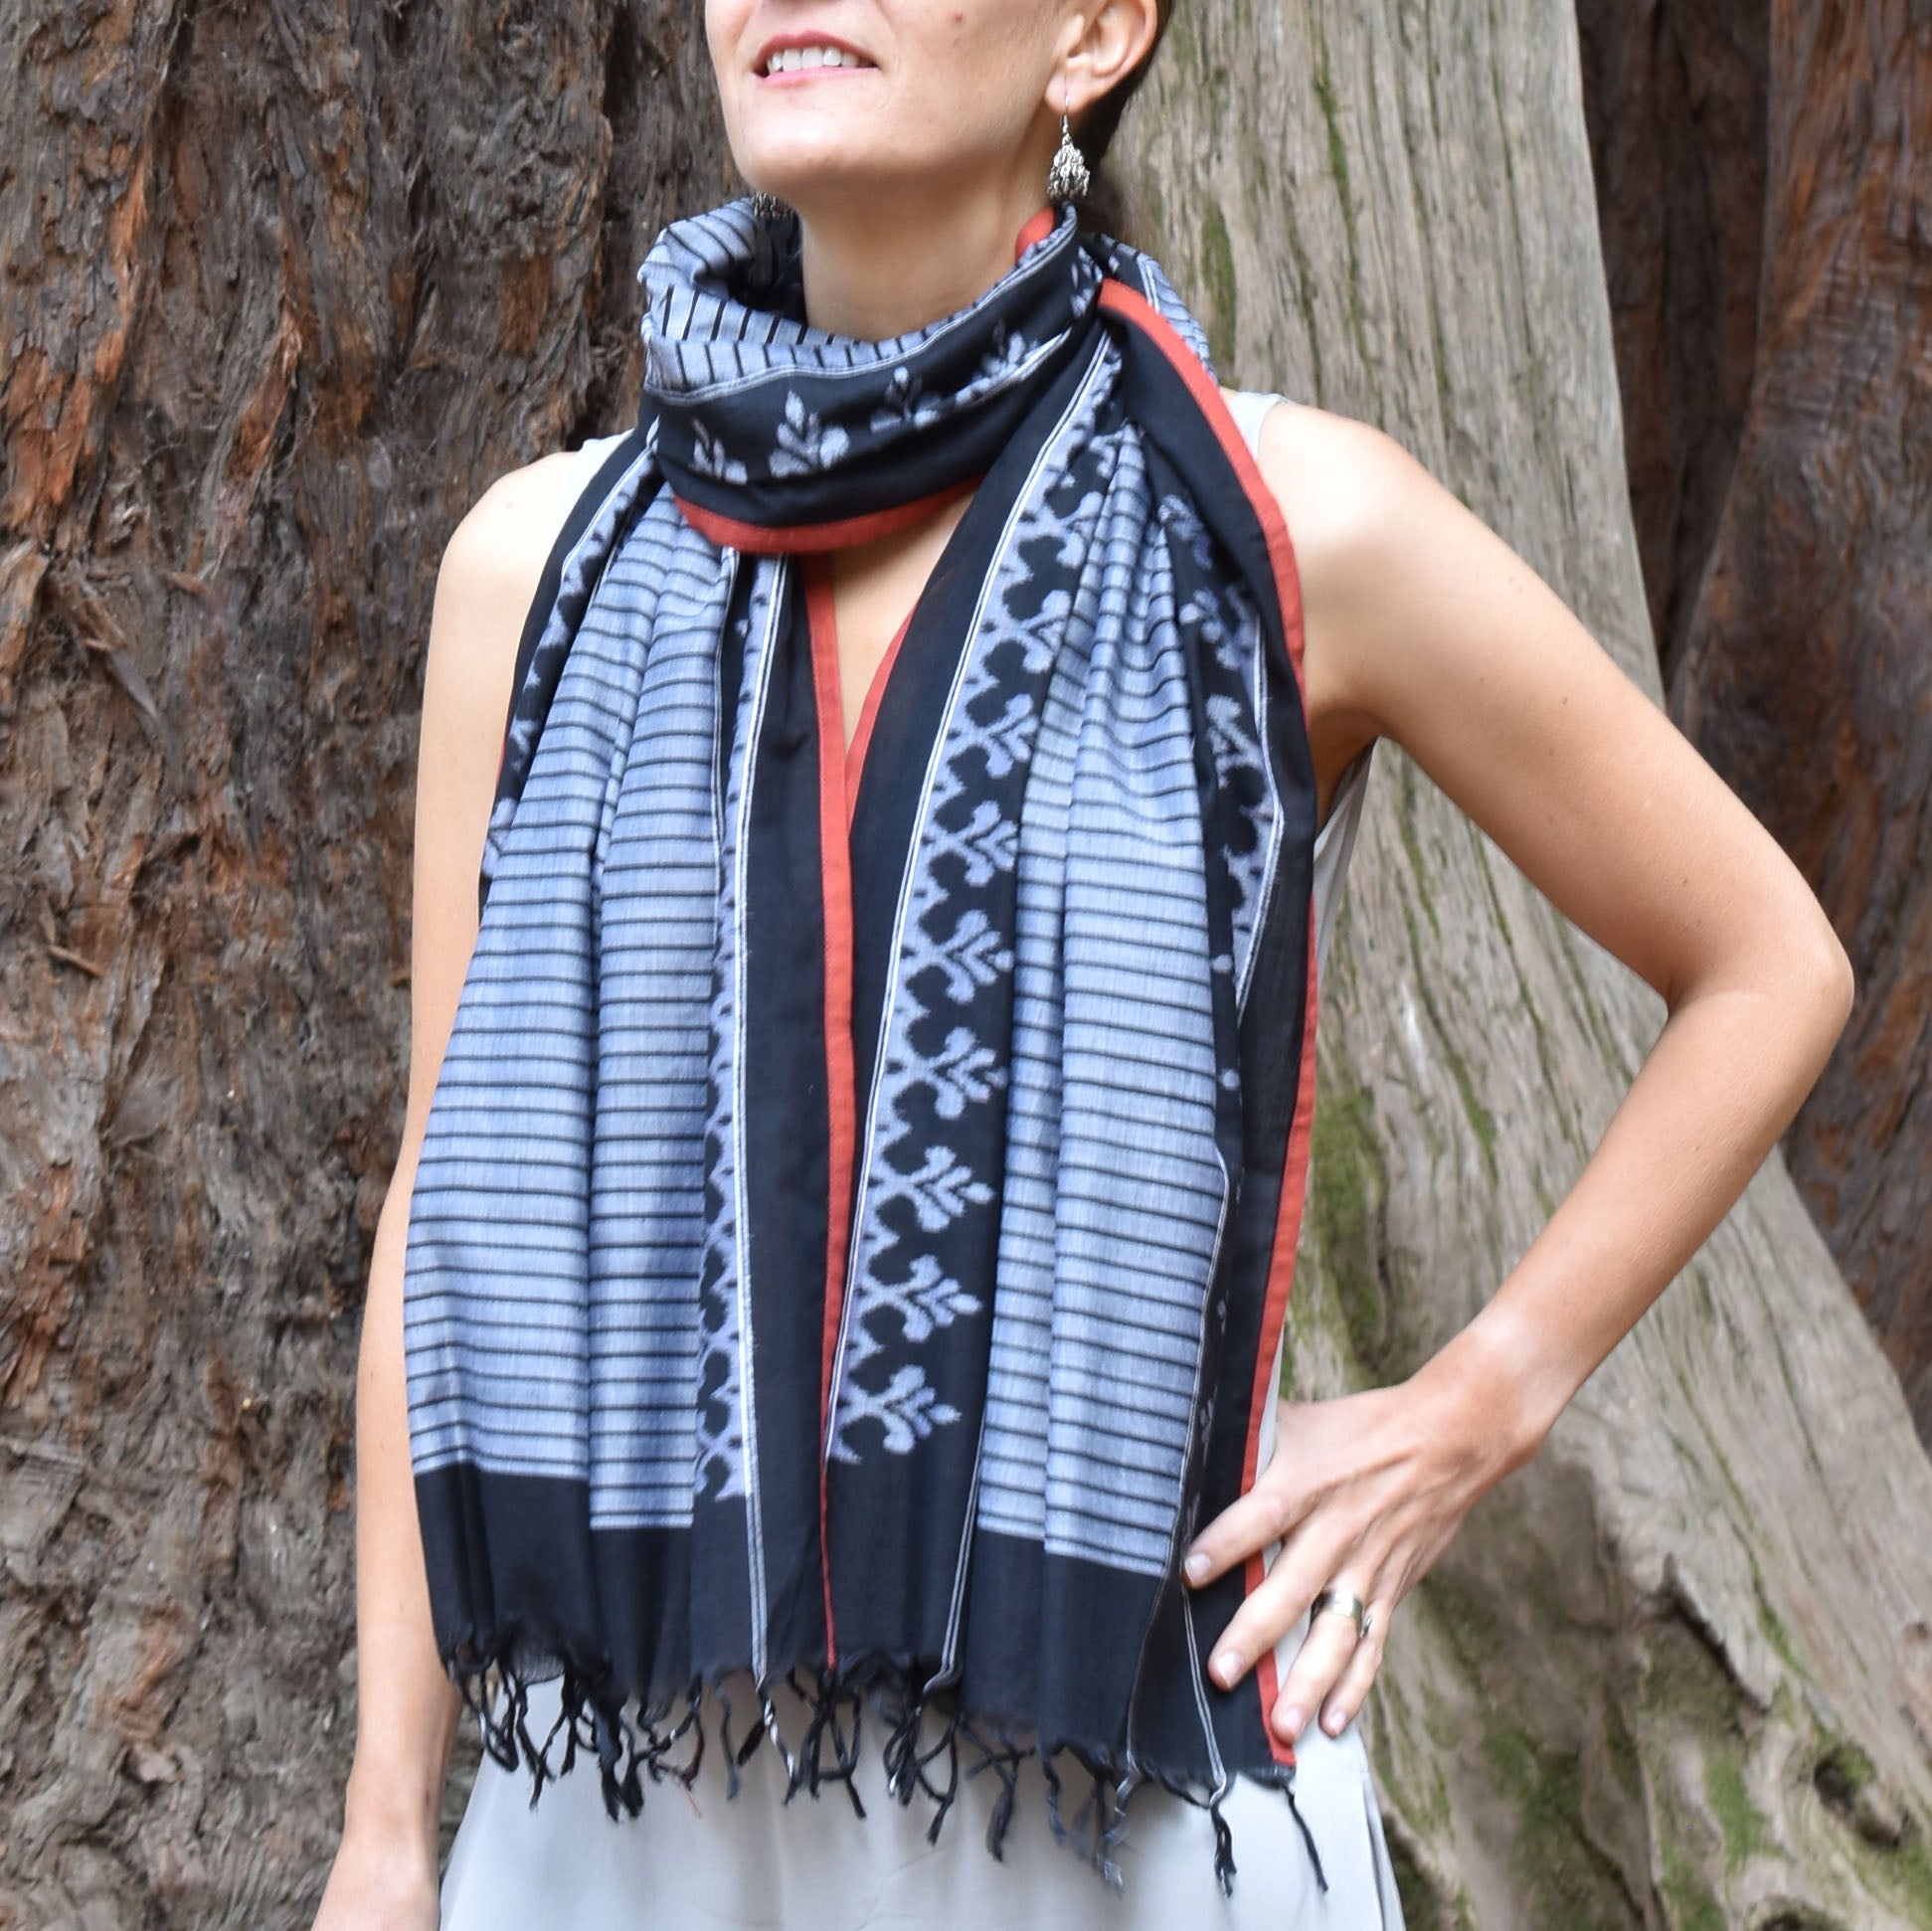 Traditional ikat stole with black fera stripes on grey cotton base and contrast orange edge piping